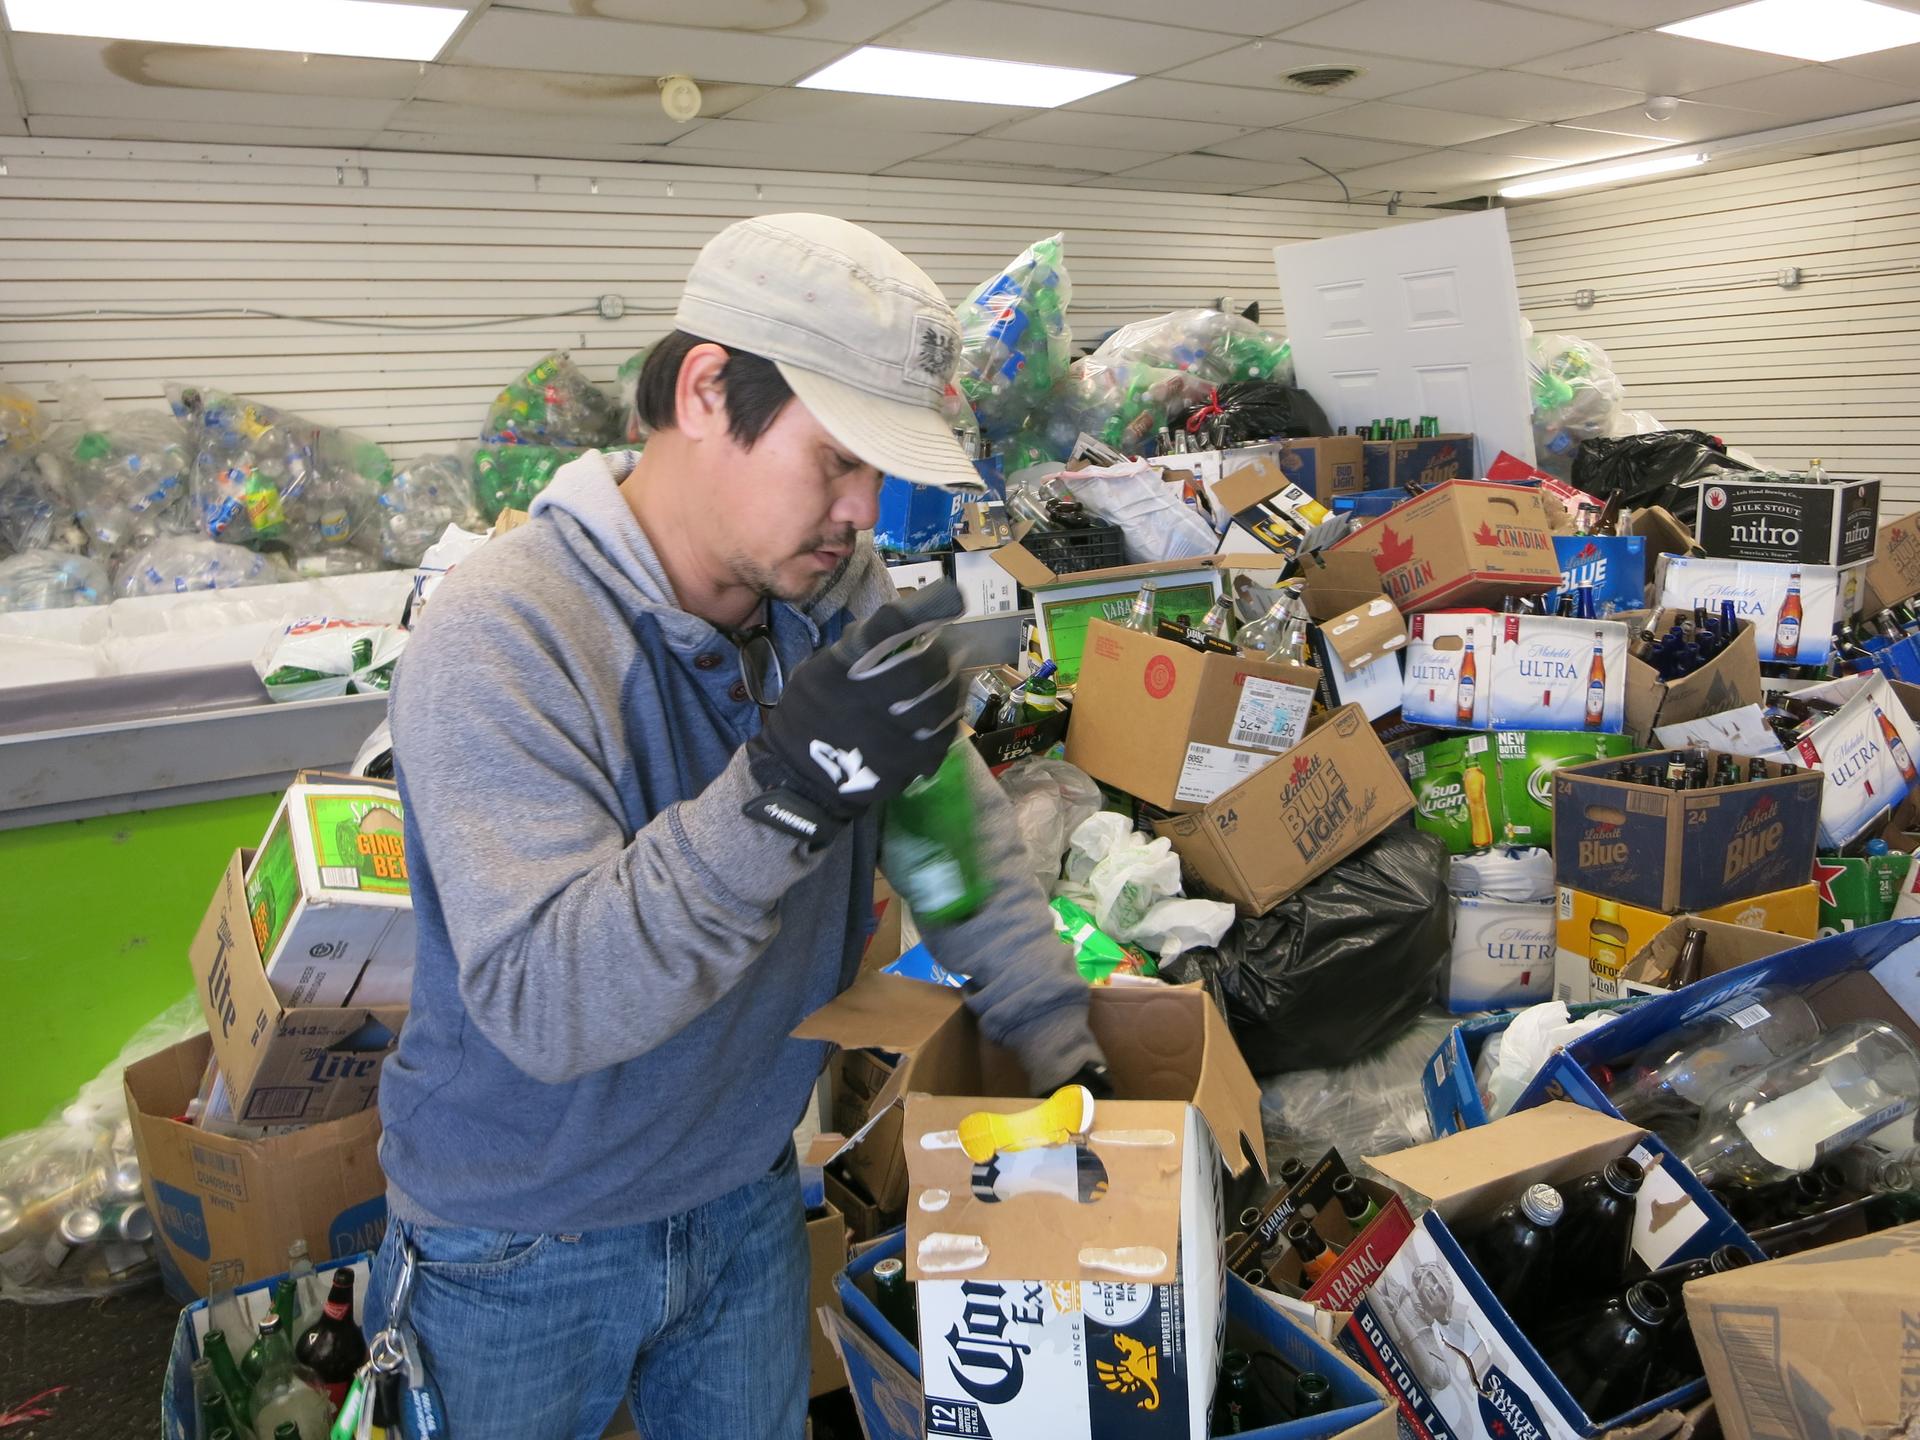 Buffalo resident and Burmese immigrant Zah Win earns his living collecting cans and bottles for recycling.